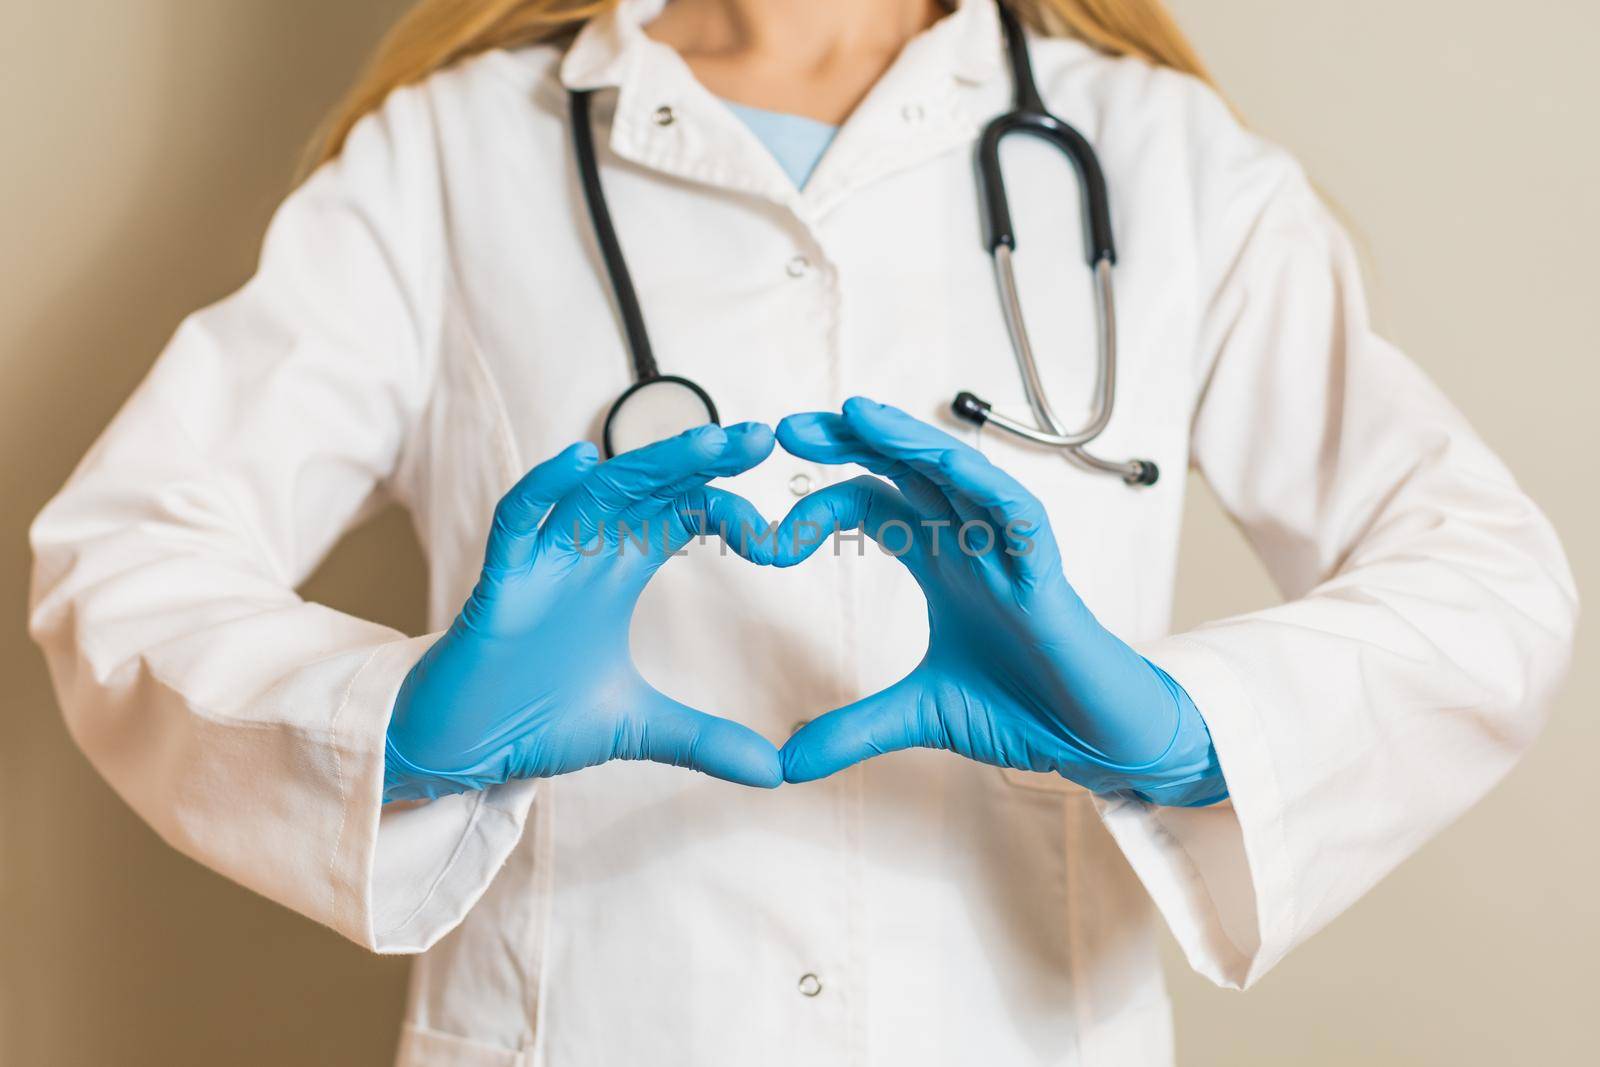 Image of female doctor showing heart shape with hands.